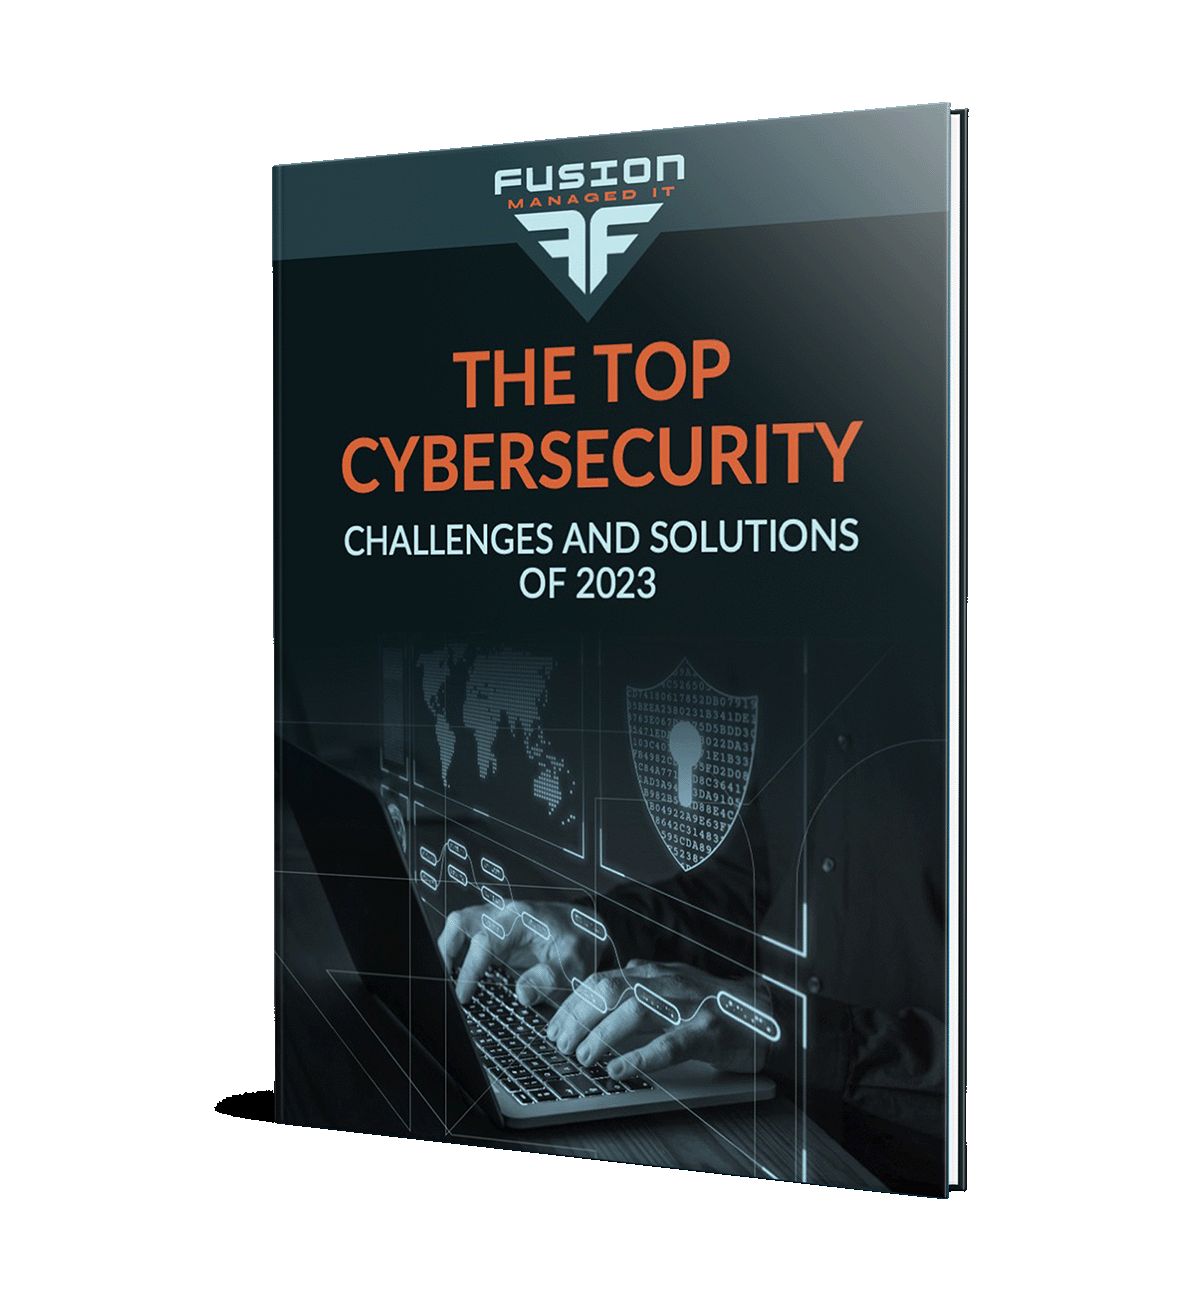 The top cybersecurity